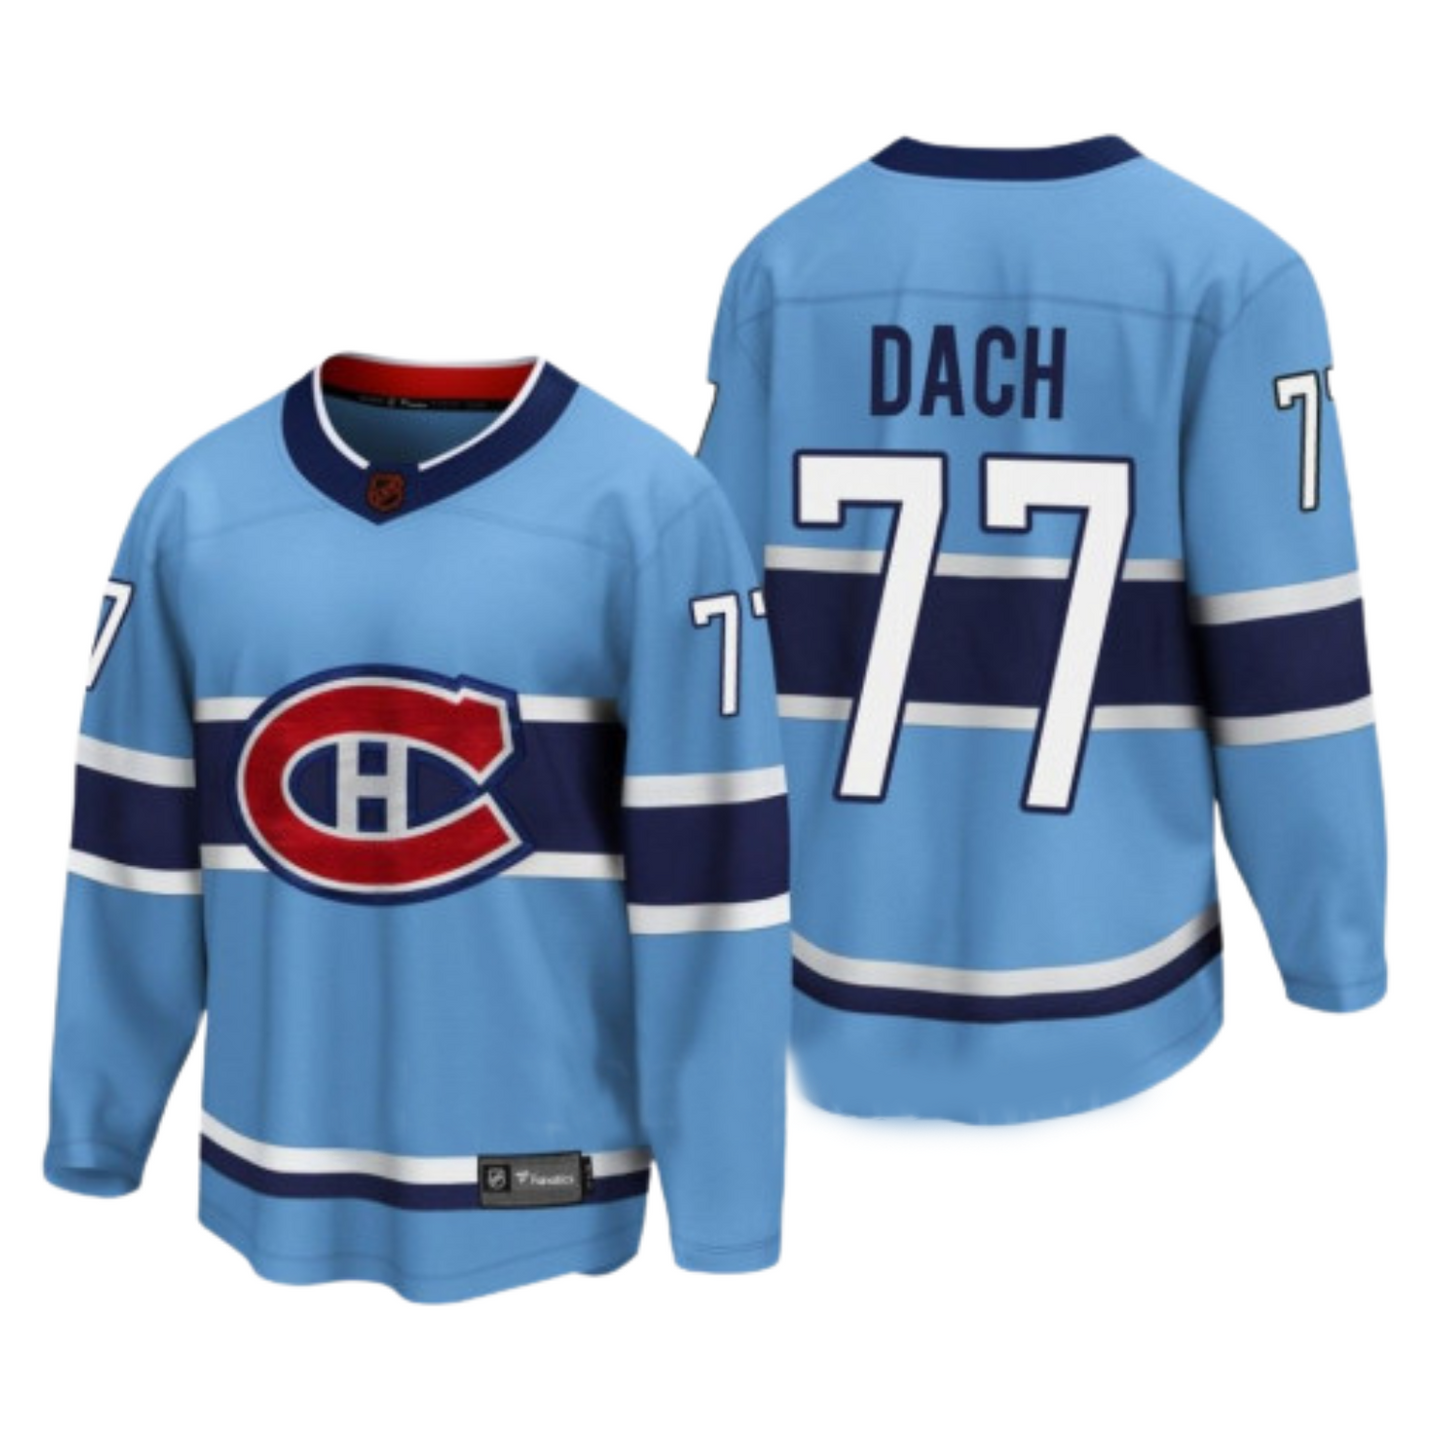 NHL Kirby Dach Montreal Canadiens 77 Jersey